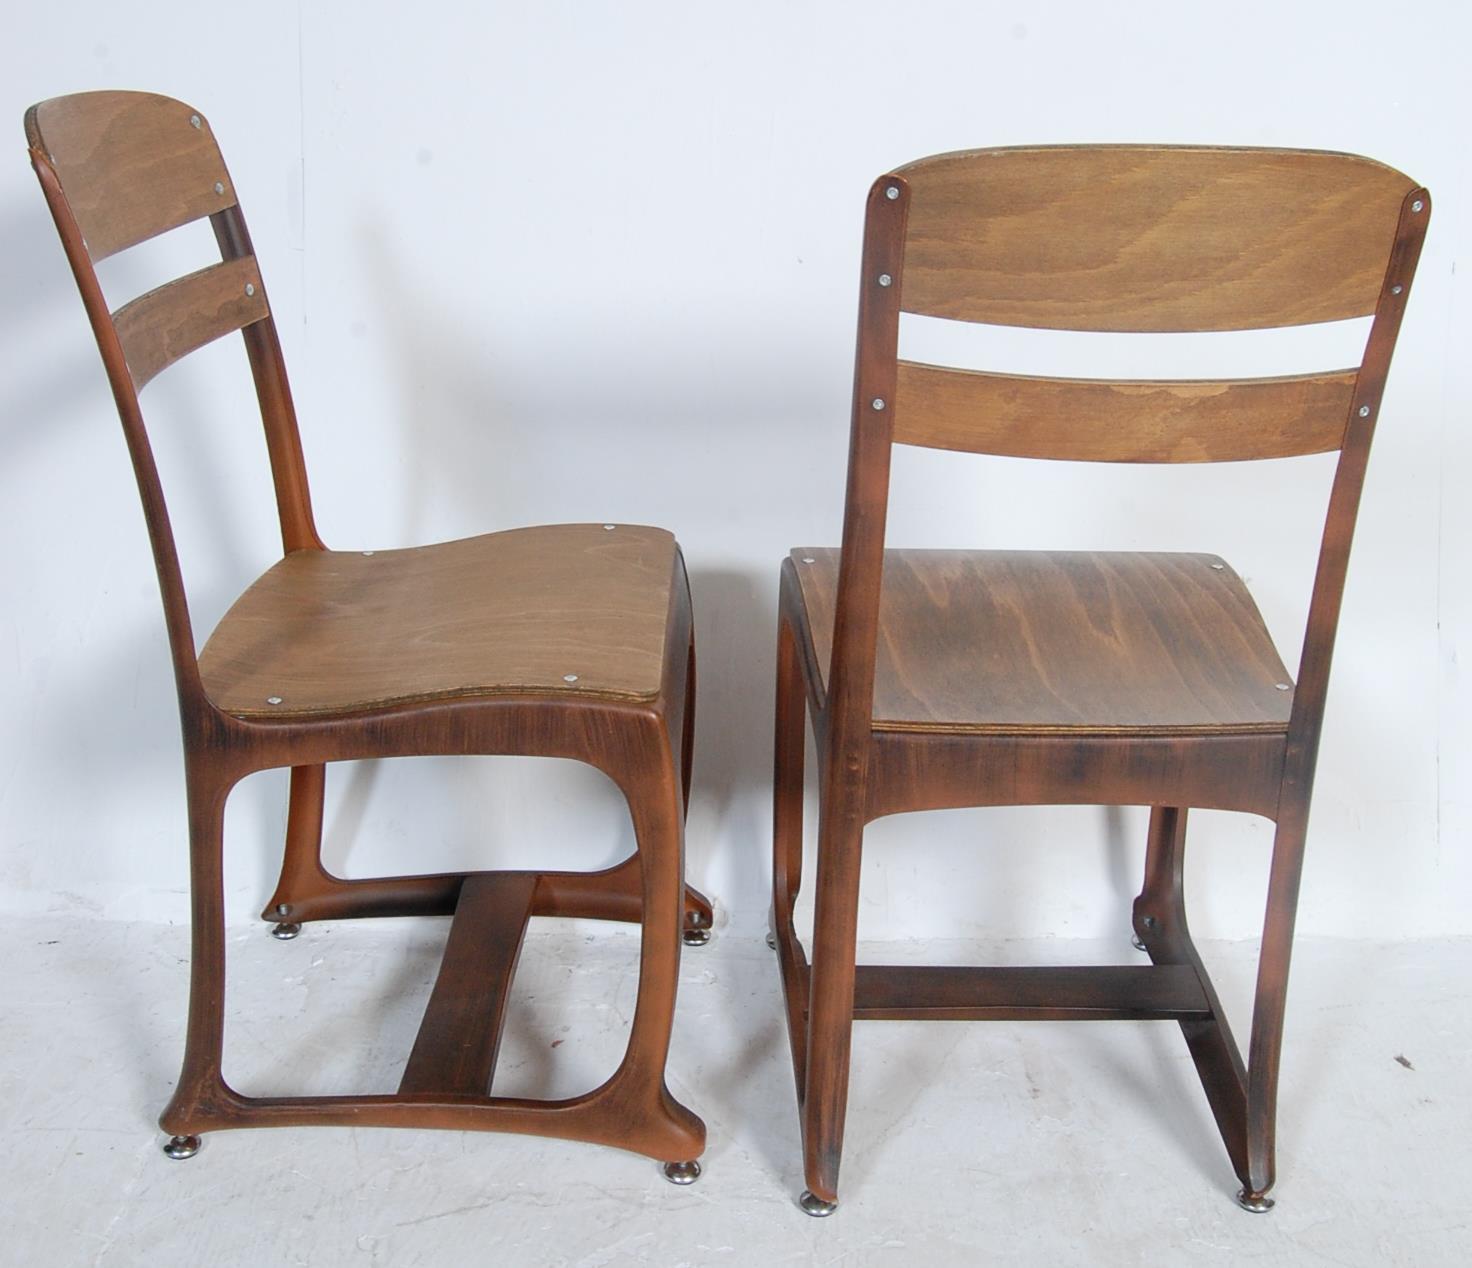 COLLECTION OF RETRO VINTAGE INDUSTRIAL DINING CHAIRS - Image 9 of 9